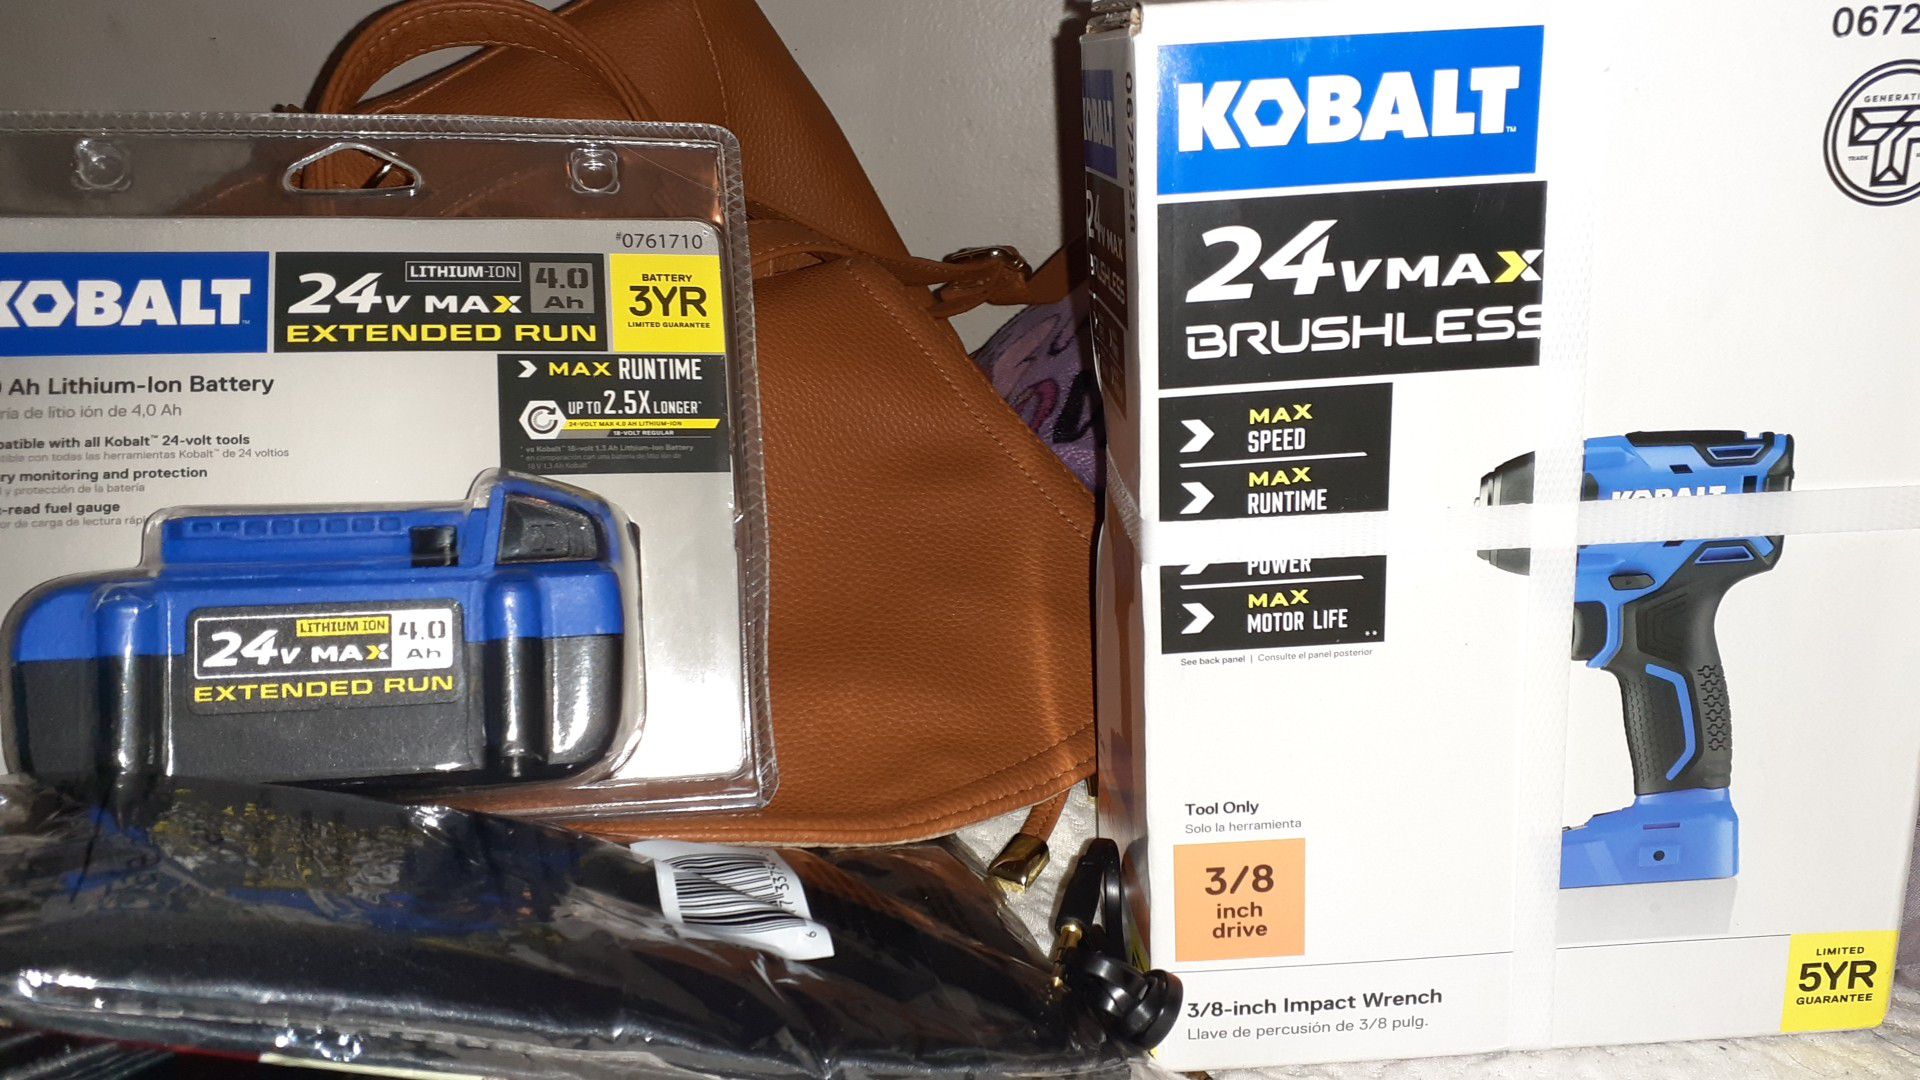 Kobalt drill and extra battery 3yr limited guarantee